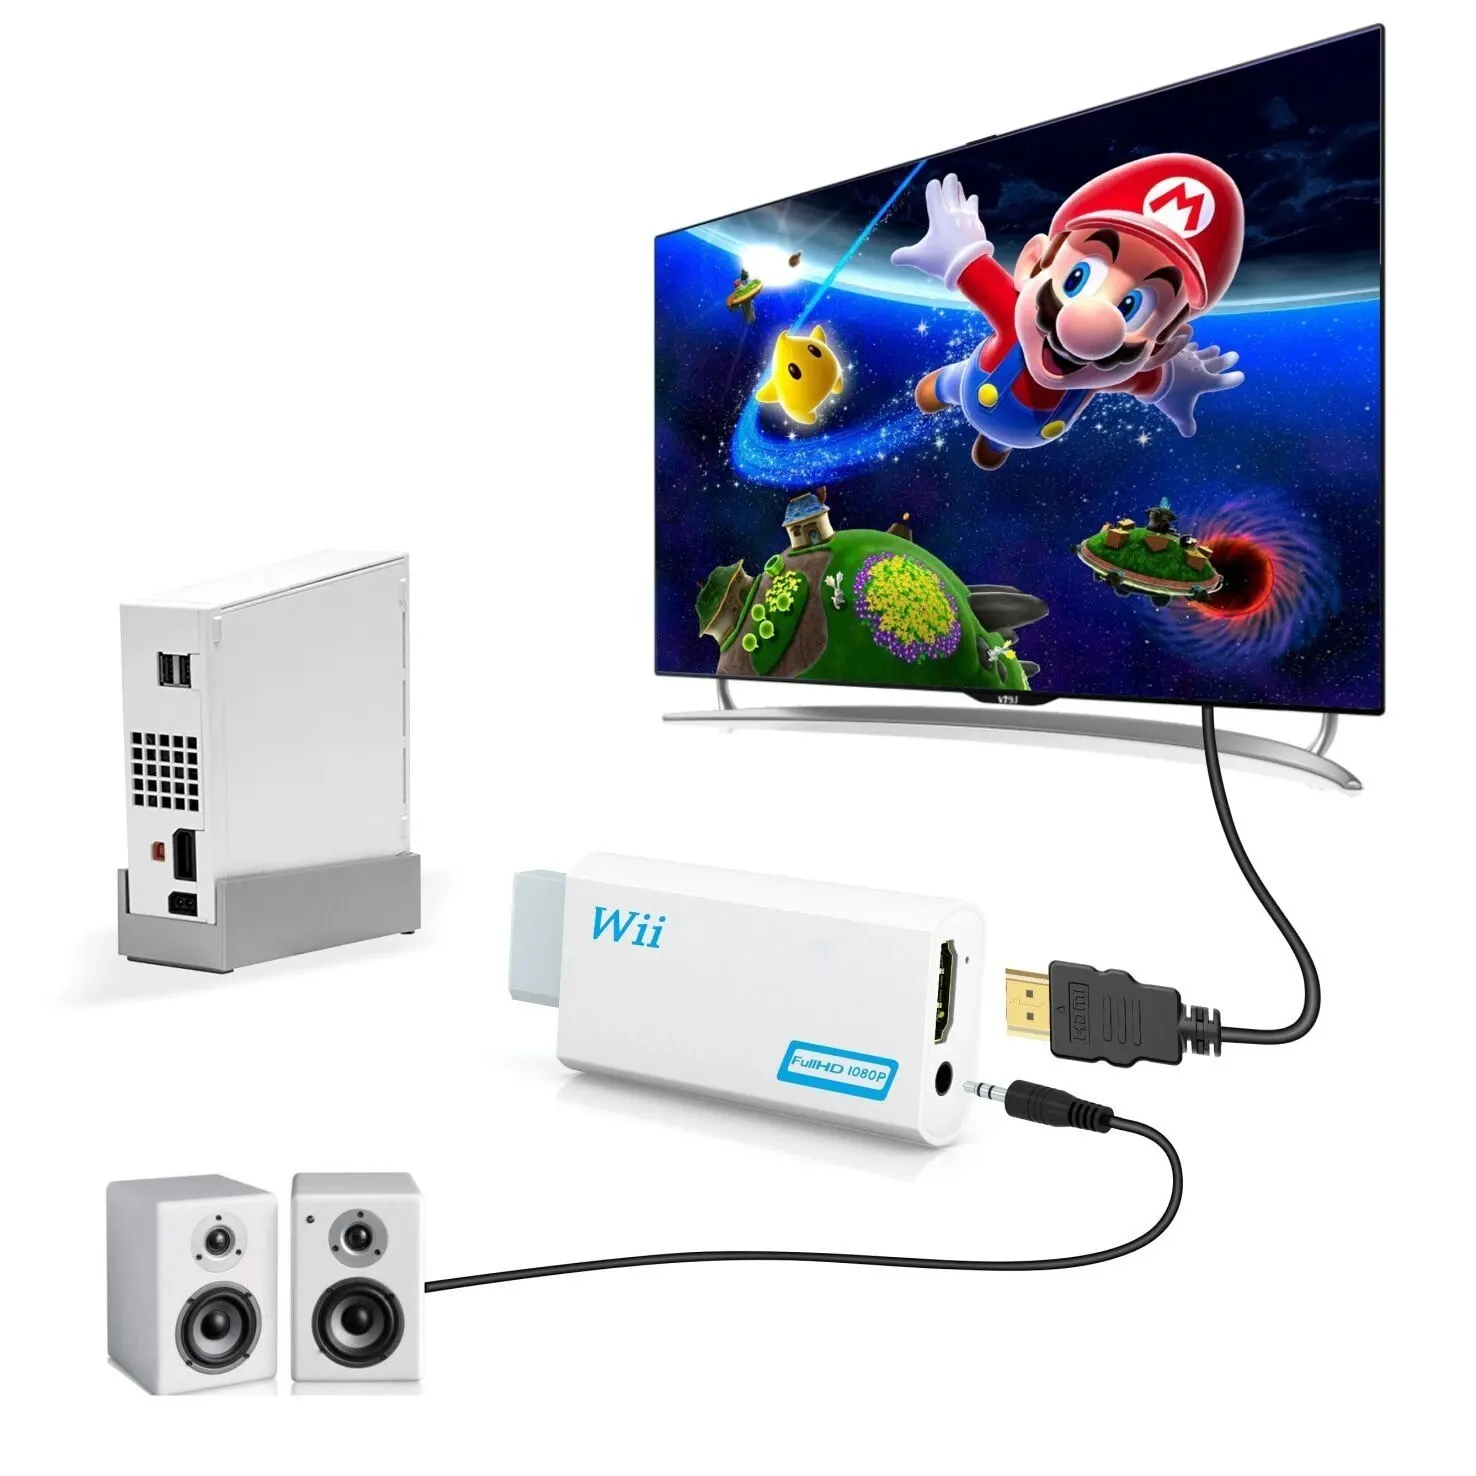 Full HD 1080P Wii to HDMI Compatible Converter Adapter Wii2HDMI Converter 3.5mm Audio for PC HDTV Monitor Display Dropshipping images - 6